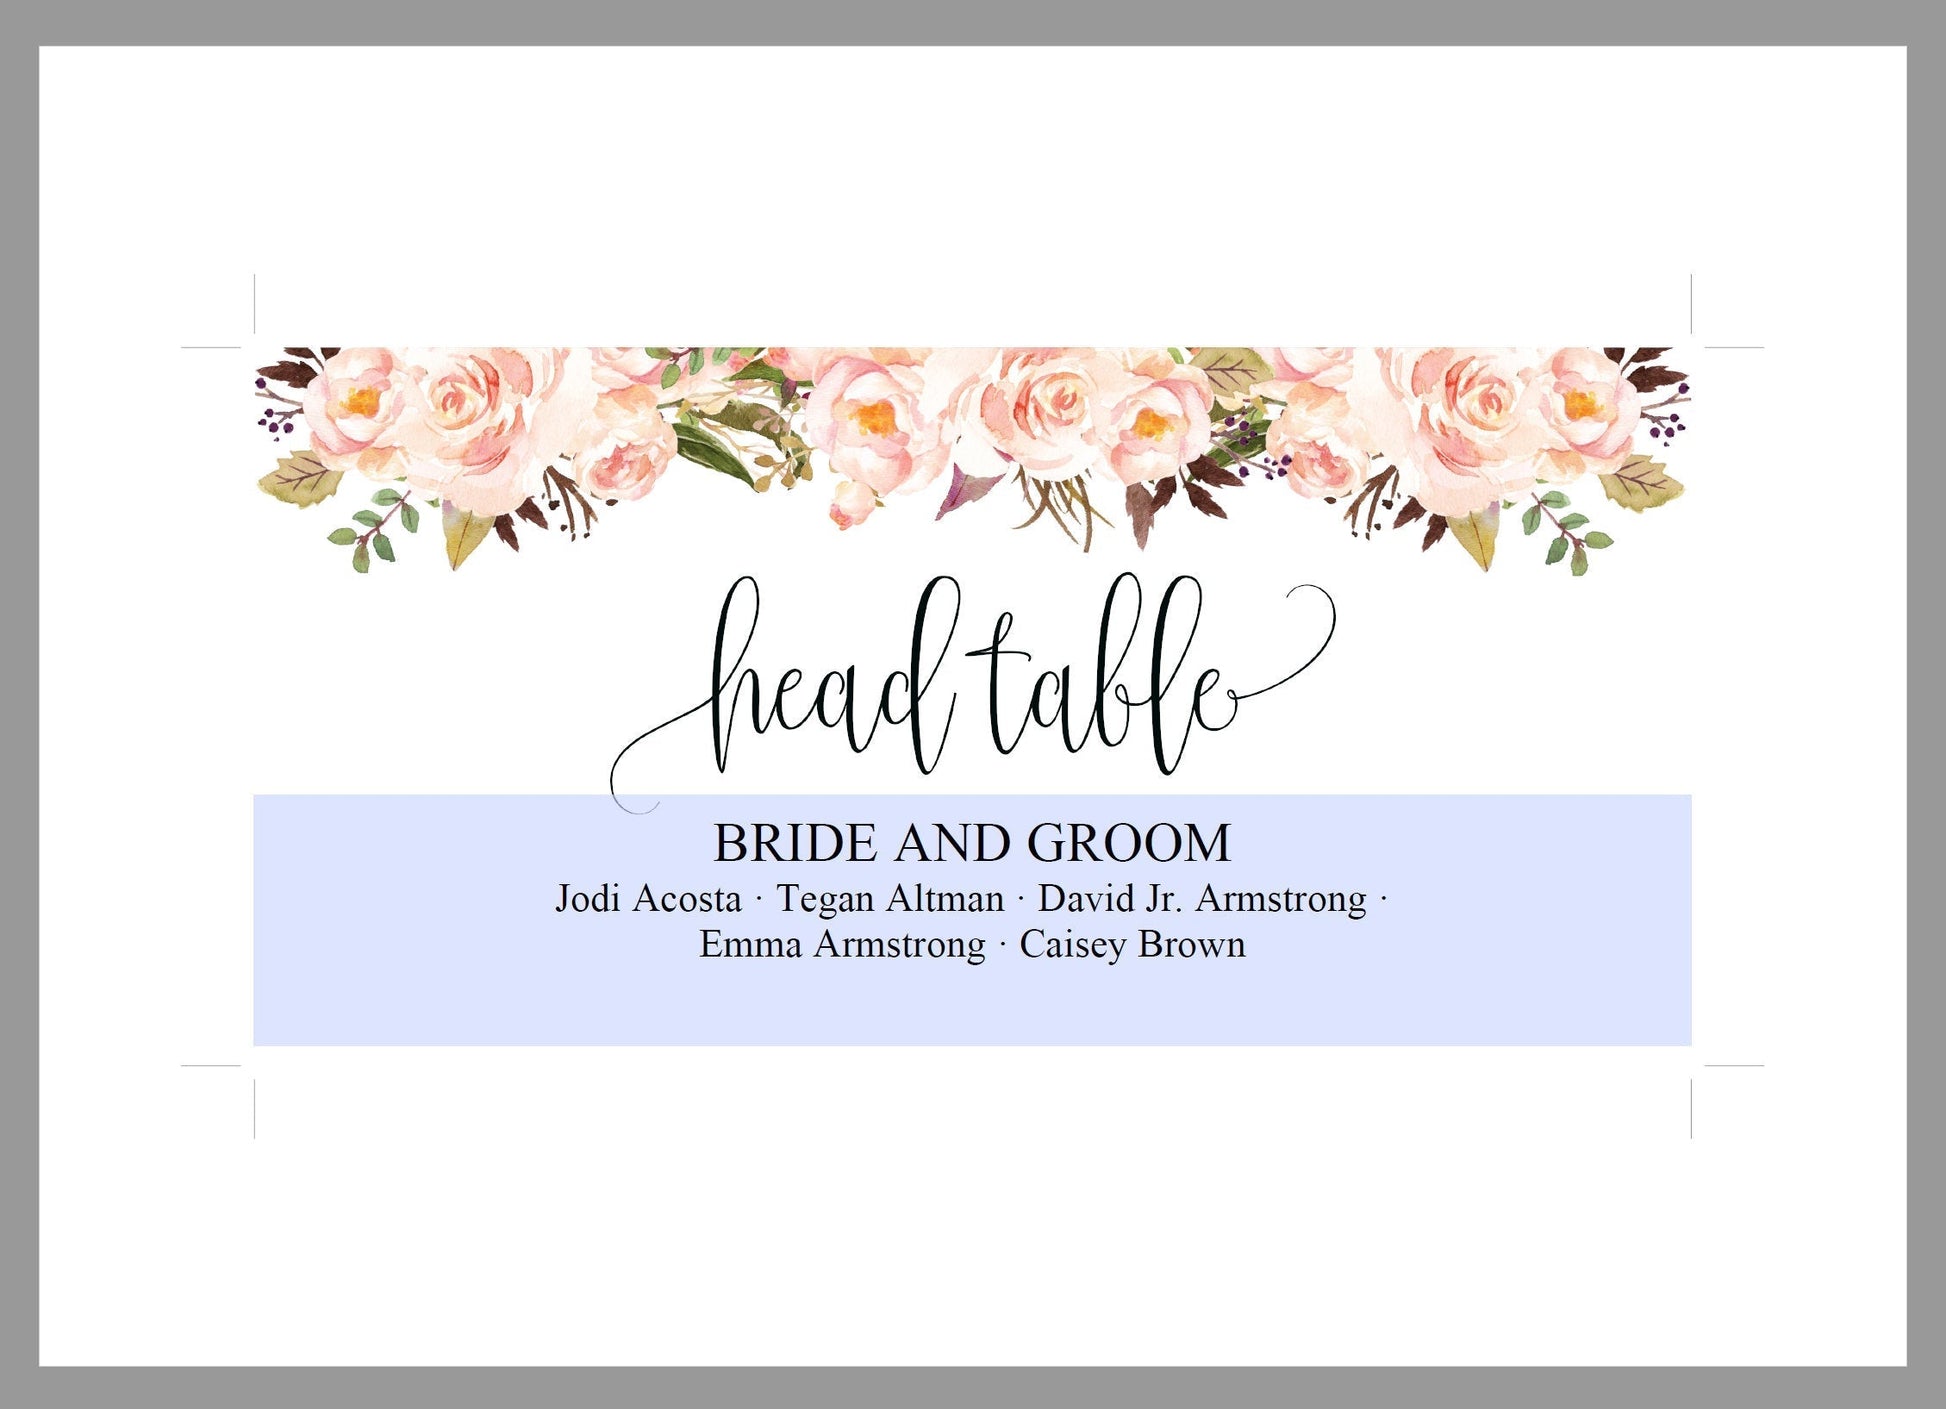 Wedding Seating Chart Template, Printable Floral Seating Sign, Seating Cards, Editable Text INSTANT DOWNLOAD -KATHERINE SEATING CHARTS | CARDS SAVVY PAPER CO